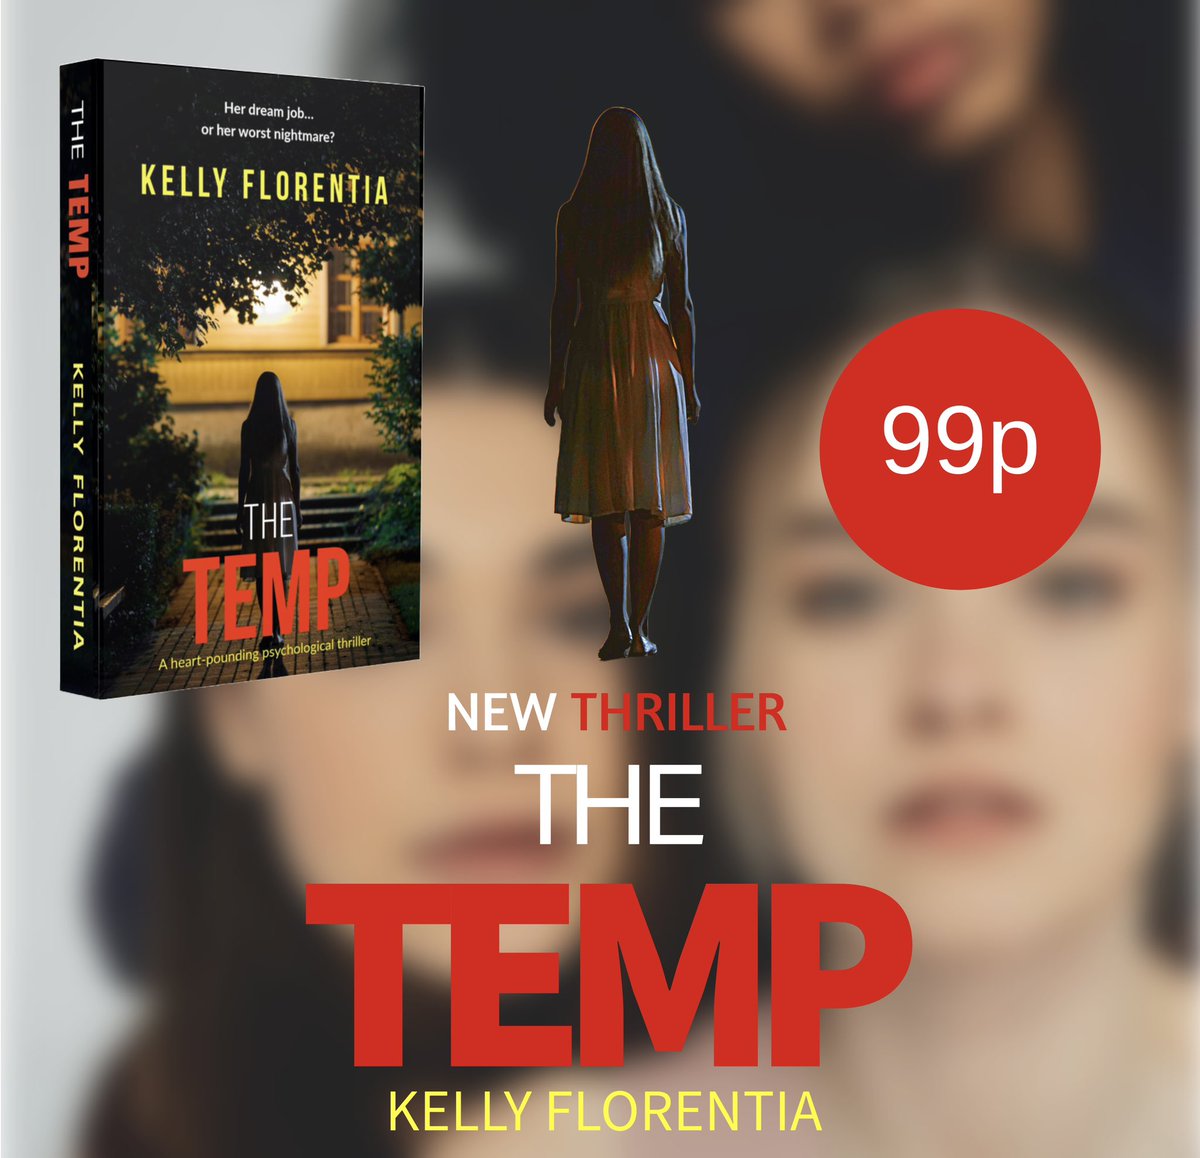 What if your dream job became your worst nightmare? 🫣 THE TEMP. Only 99p (but not for long!) 👉🏻amzn.to/3JP7Wk9 FREE with Kindle Unlimited. 🔥Perfect for fans of fast-paced #thrillers #bookaddict #mondaymotivation